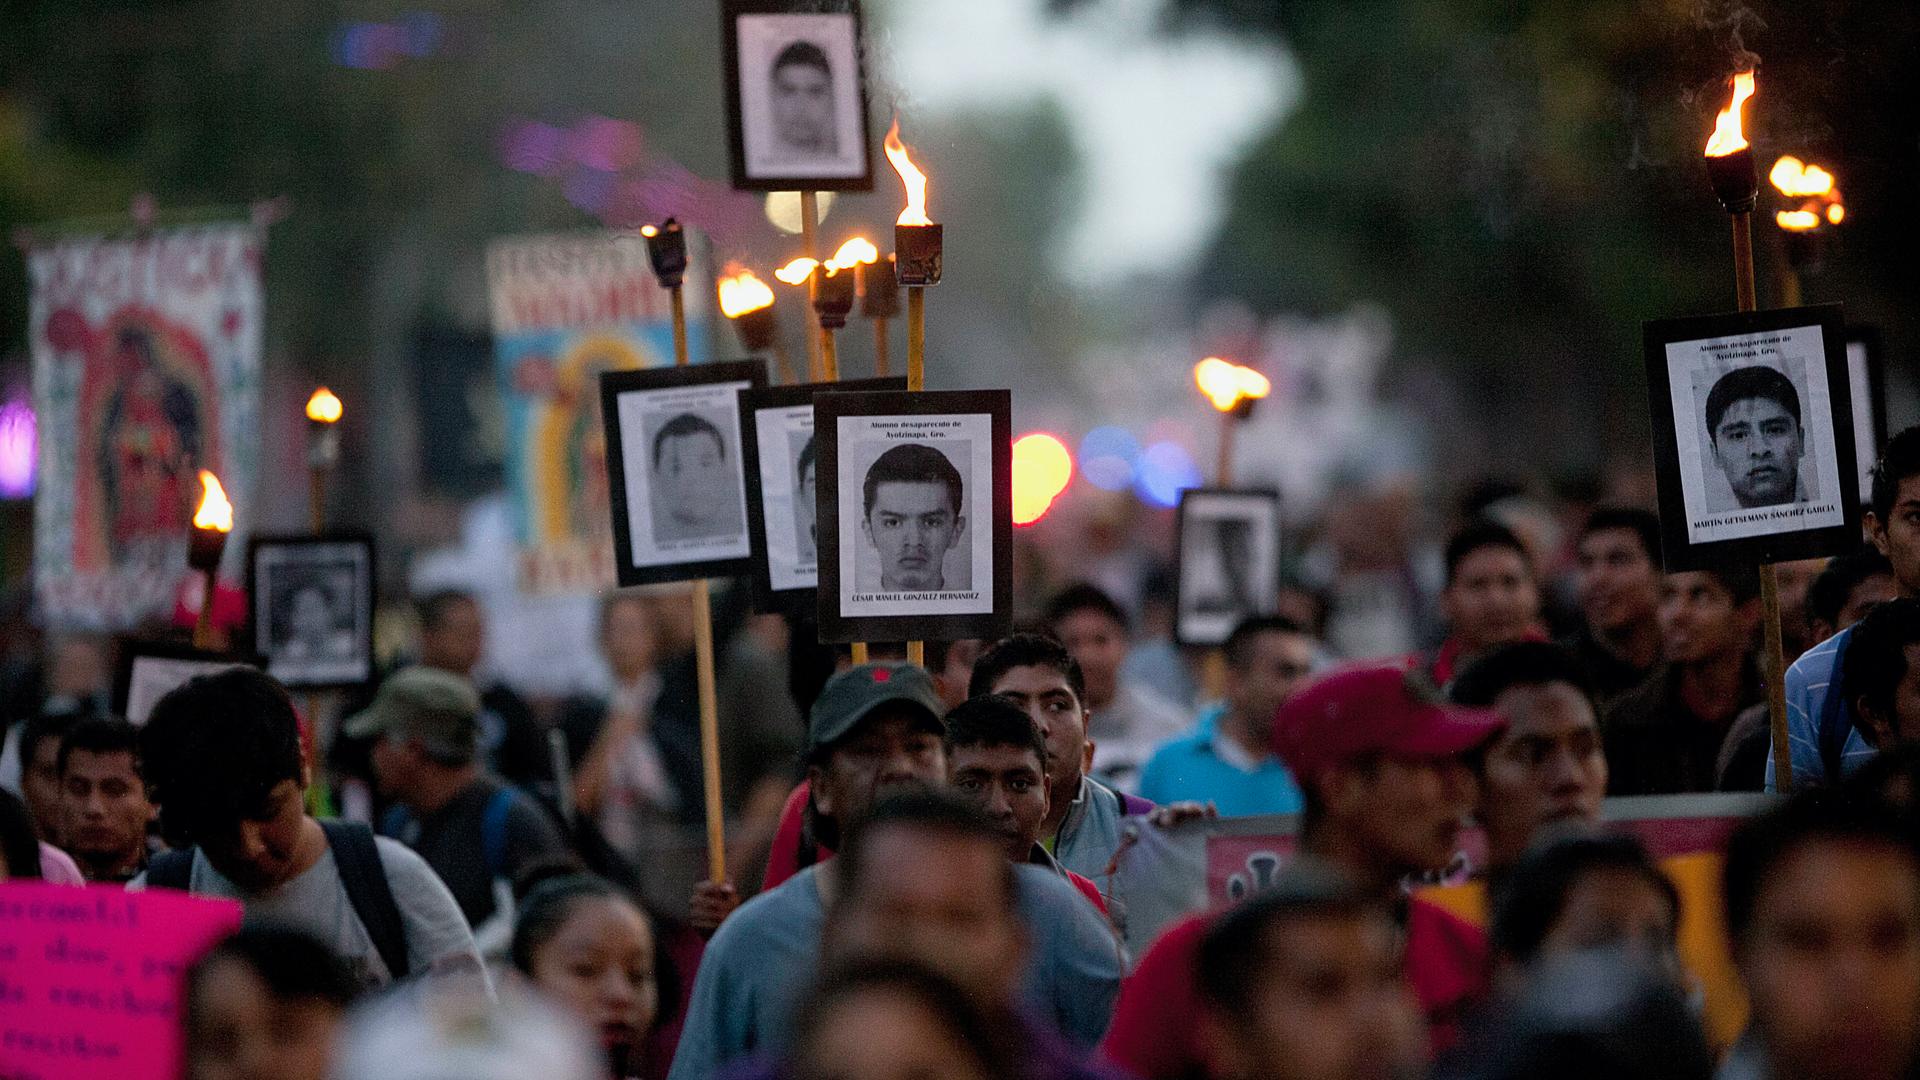 Relatives of the 43 missing students from the rural teachers college march holding pictures of their missing loved ones during a protest in Mexico City, Dec. 26, 2015. 